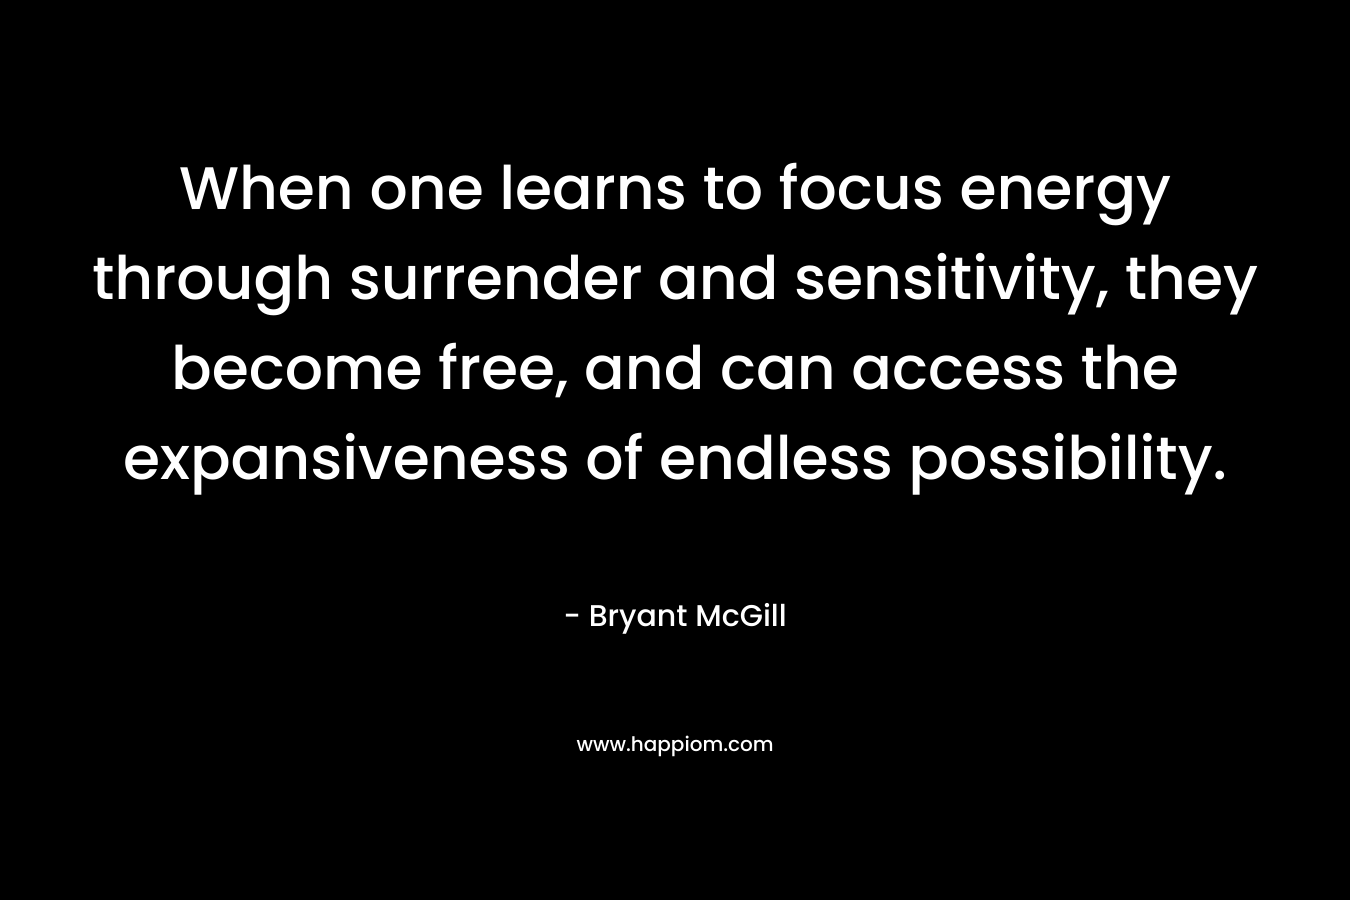 When one learns to focus energy through surrender and sensitivity, they become free, and can access the expansiveness of endless possibility.